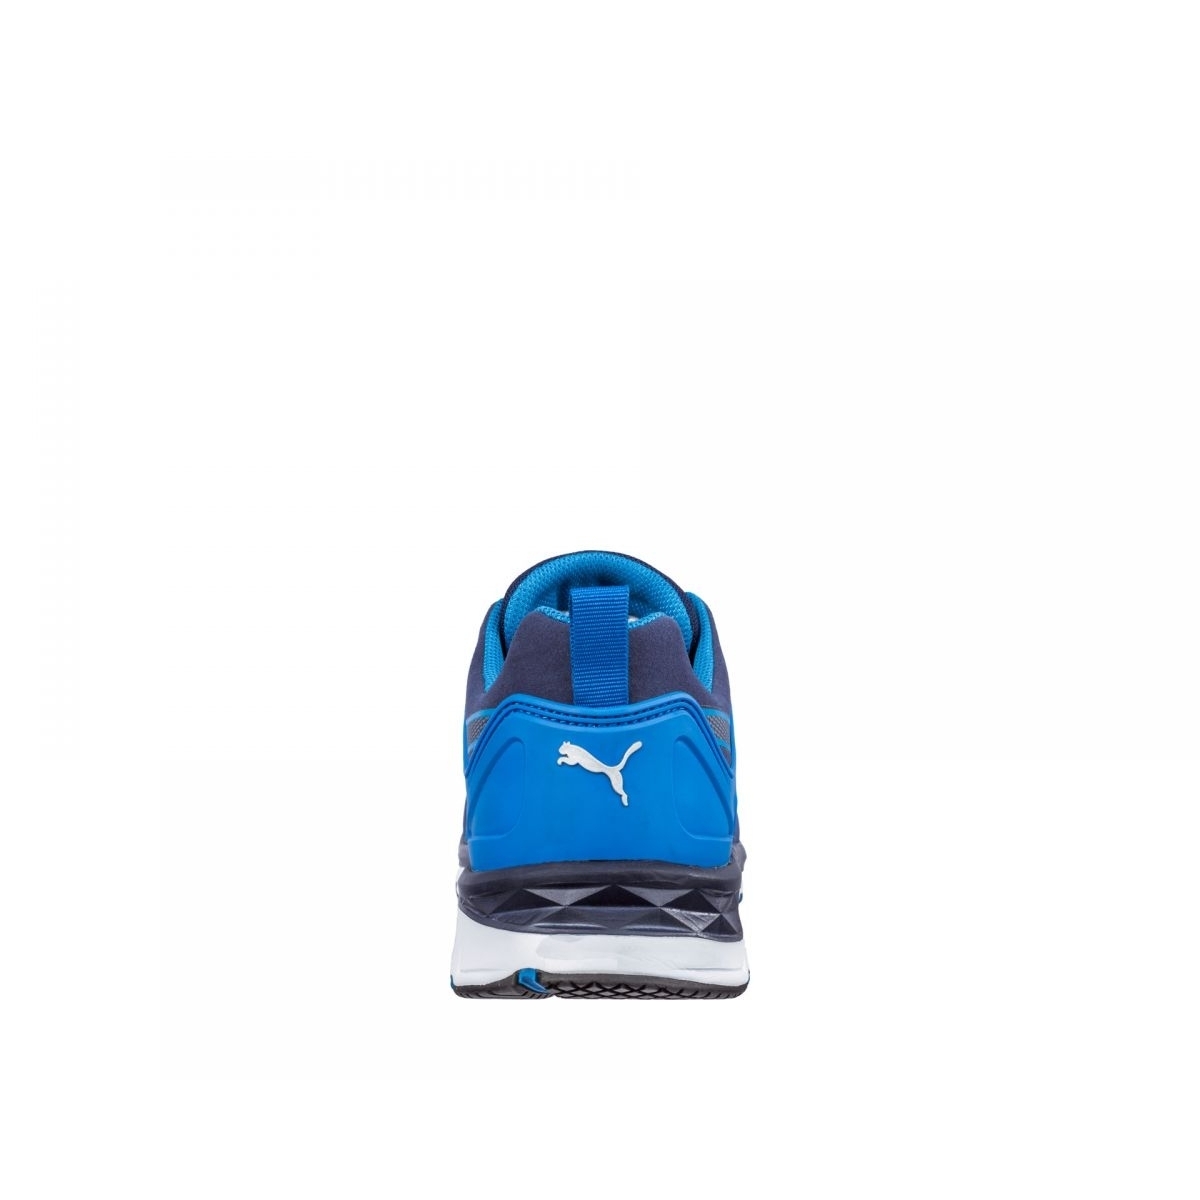 PUMA Safety Velocity 2.0 Blue Low ASTM SD Safety Shoes Safety Toe Metal Free Fiberglass Toe Cap Slip Resistant Men ONE - image 2 of 5